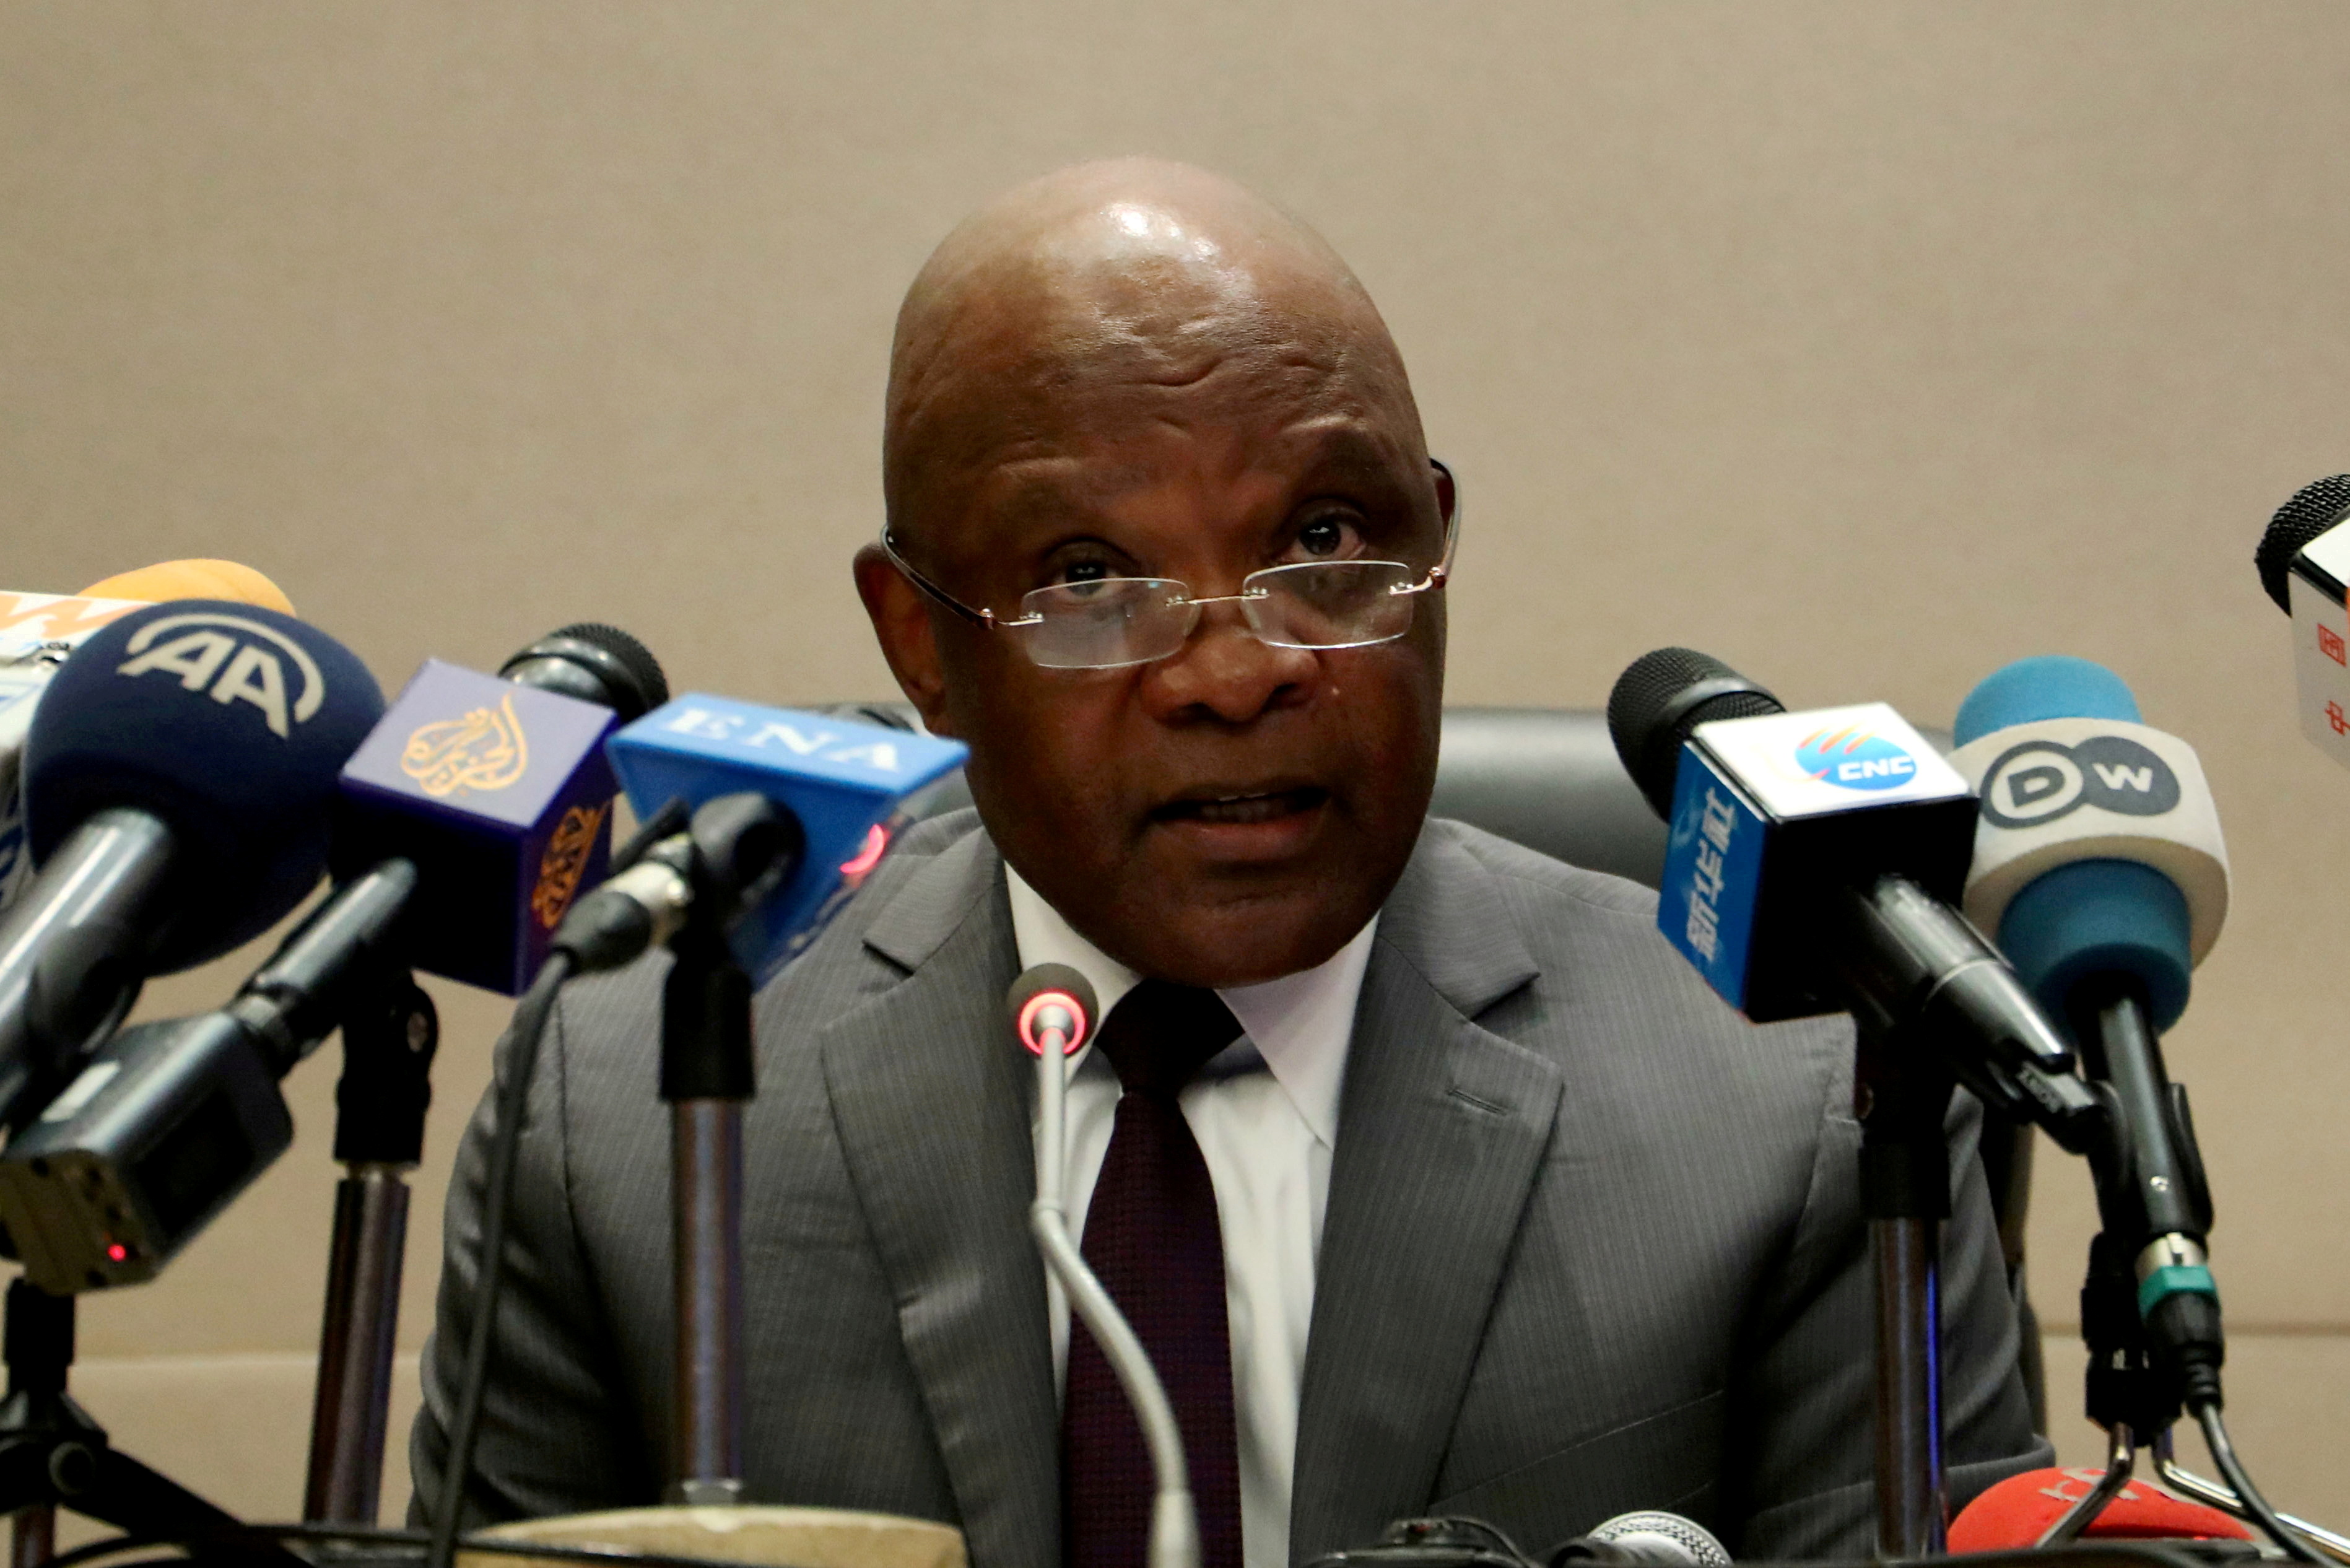 John Nkengasong, director of the African Union's Centers for Disease Control, speaks at a news conference in Addis Ababa, Ethiopia